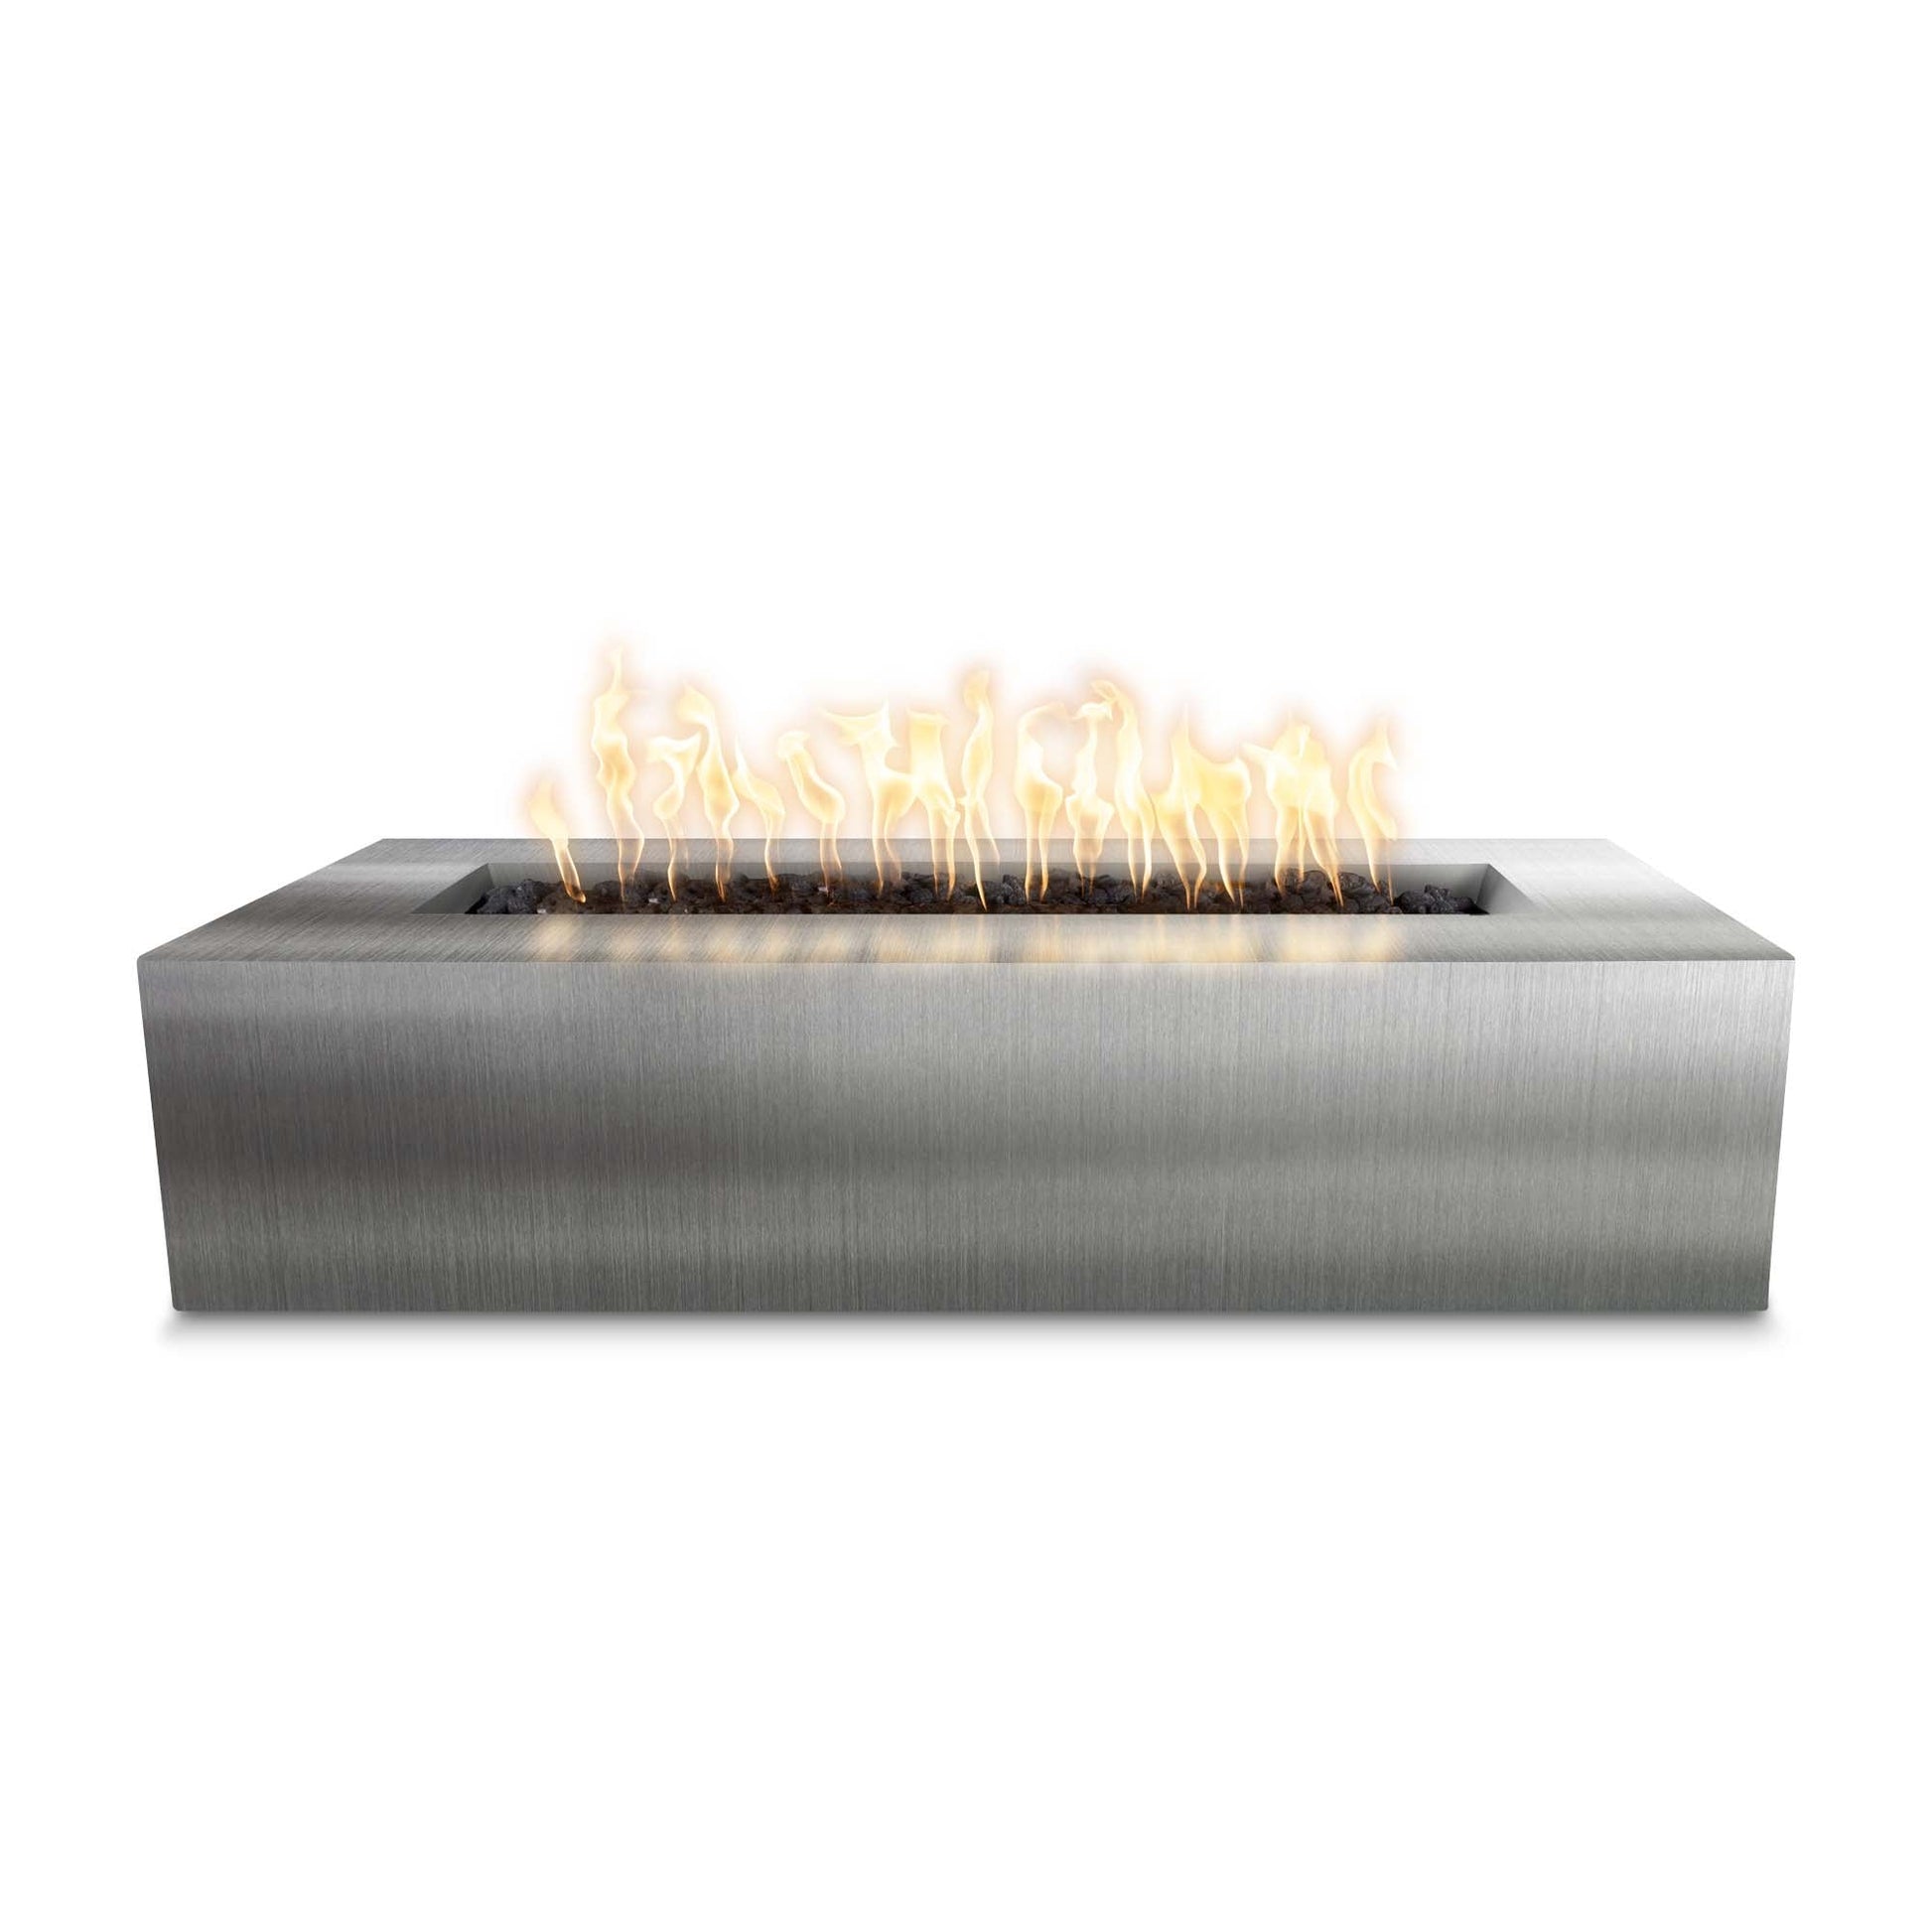 The Outdoor Plus Rectangular Regal 60" Hammered Copper Natural Gas Fire Pit with Match Lit Ignition